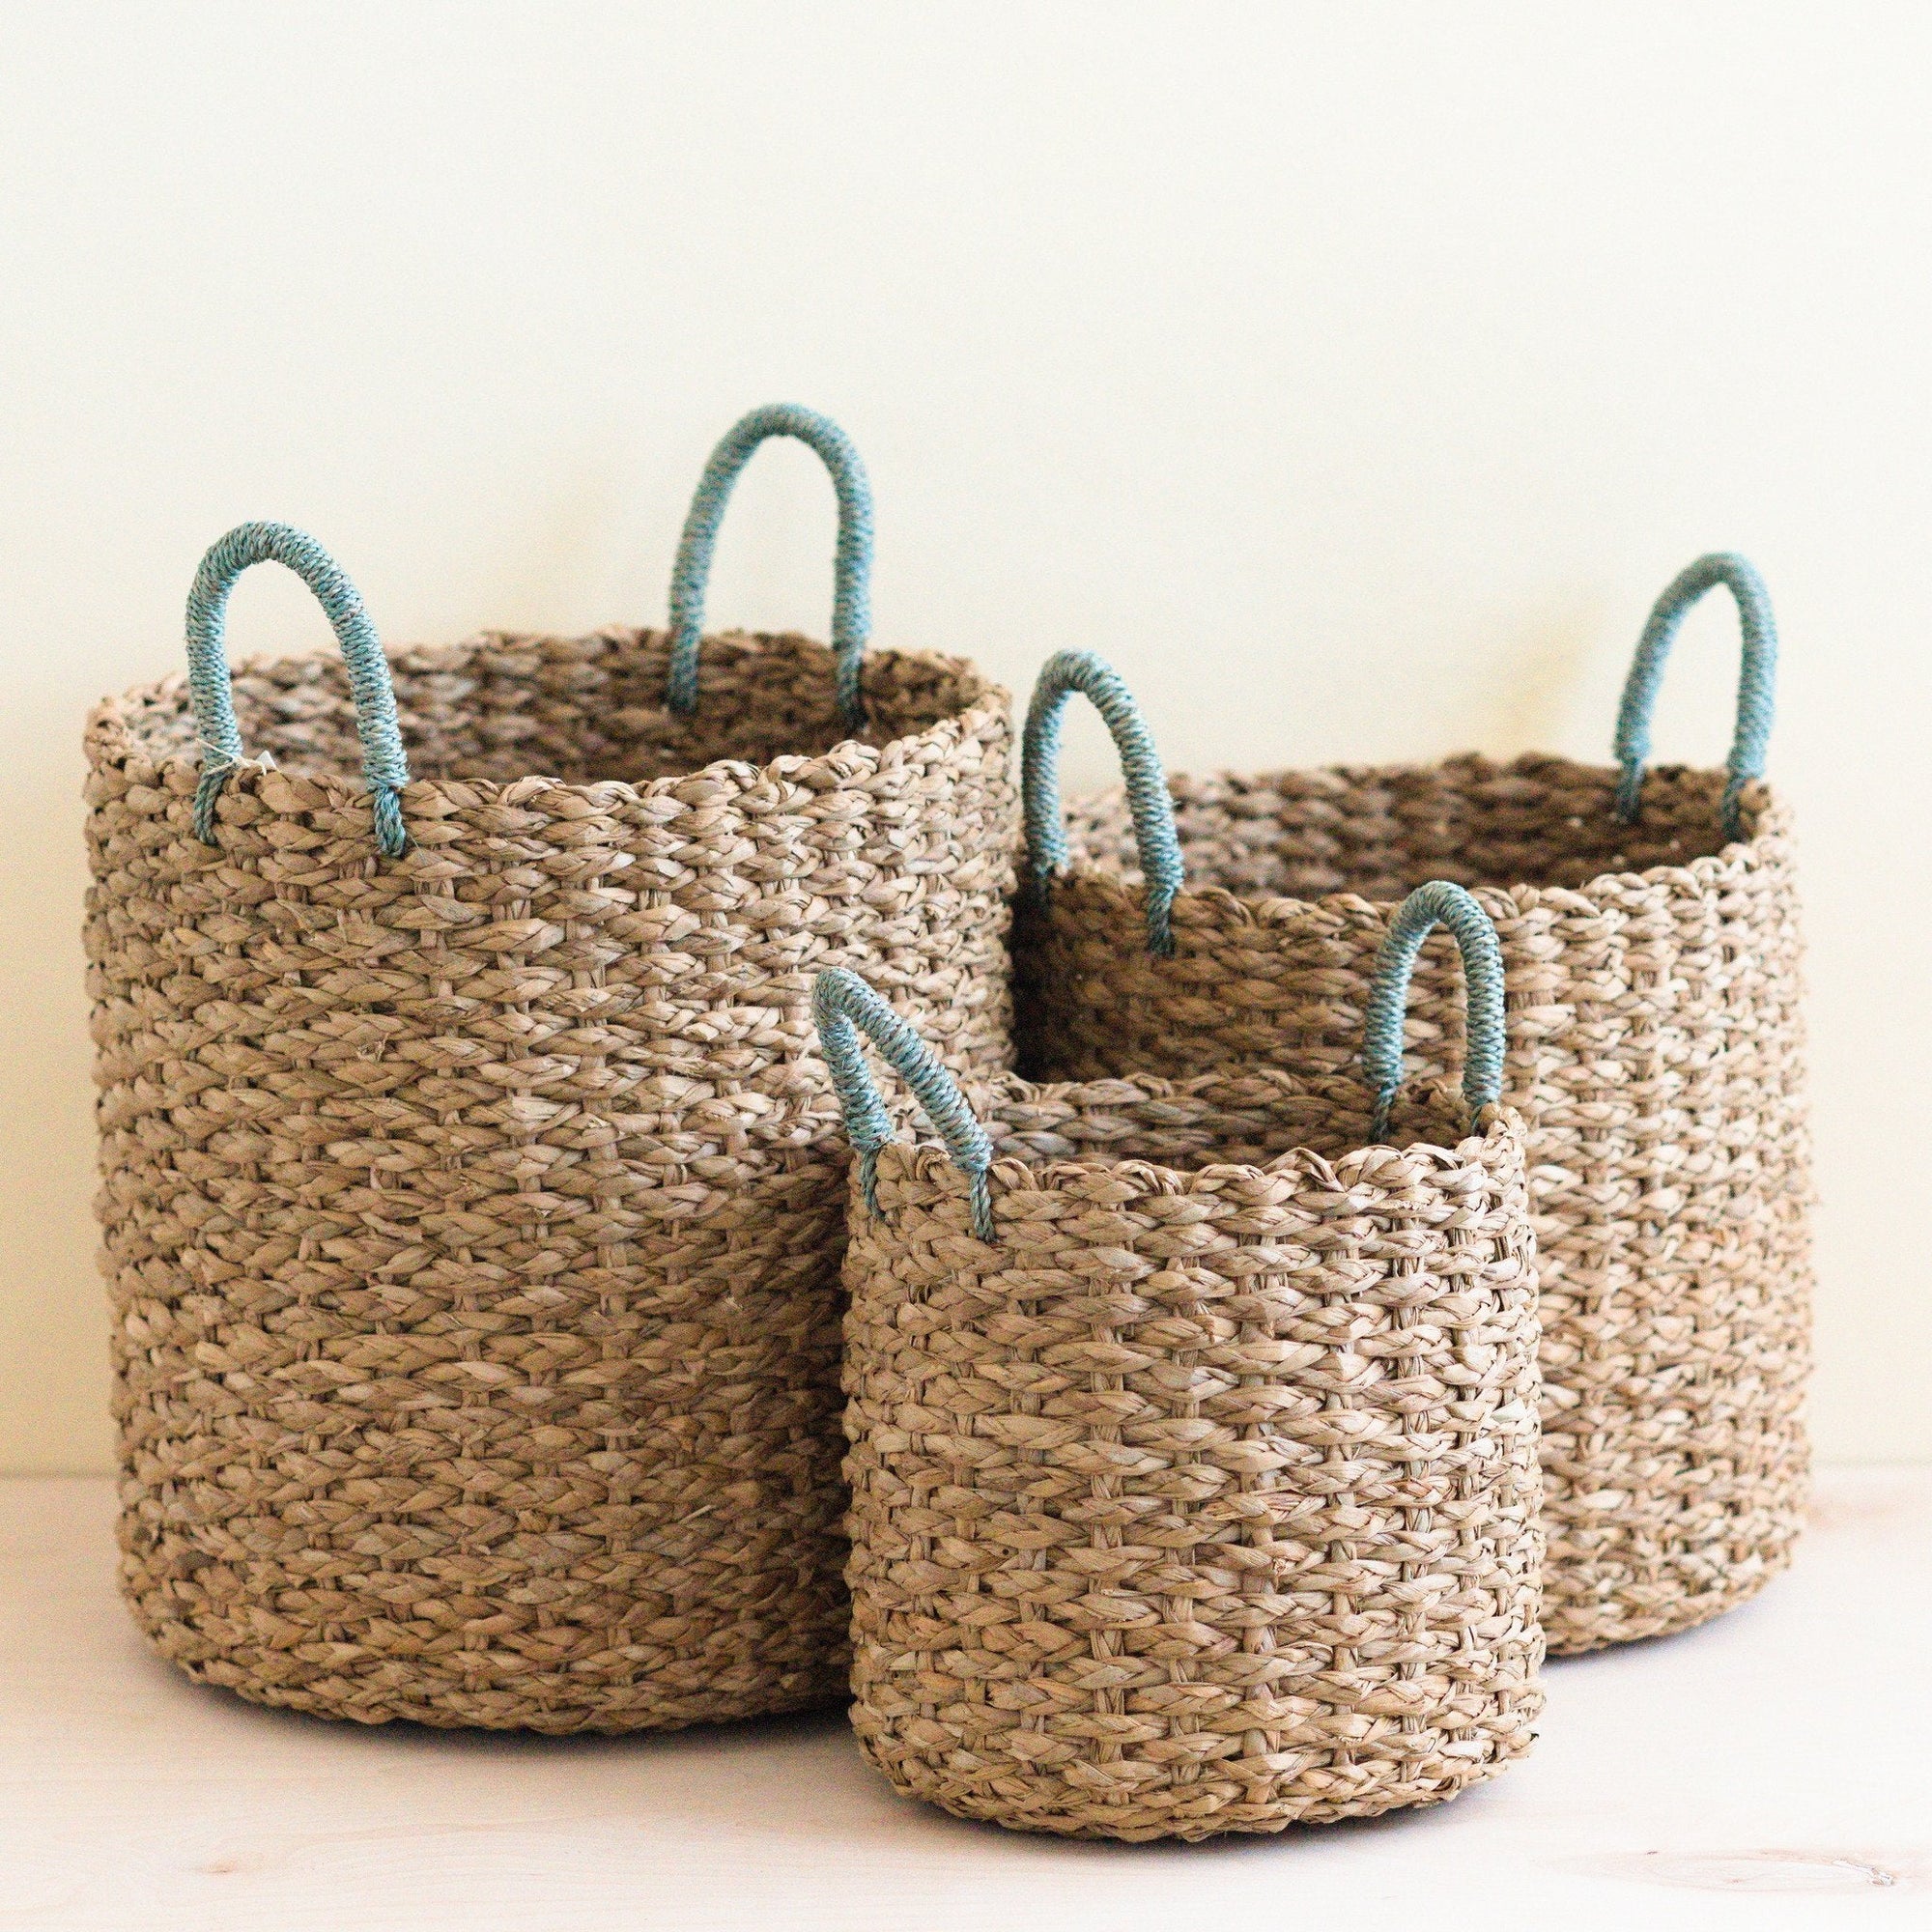 Seagrass Woven Baskets with Sky Blue Handle - Set of 3